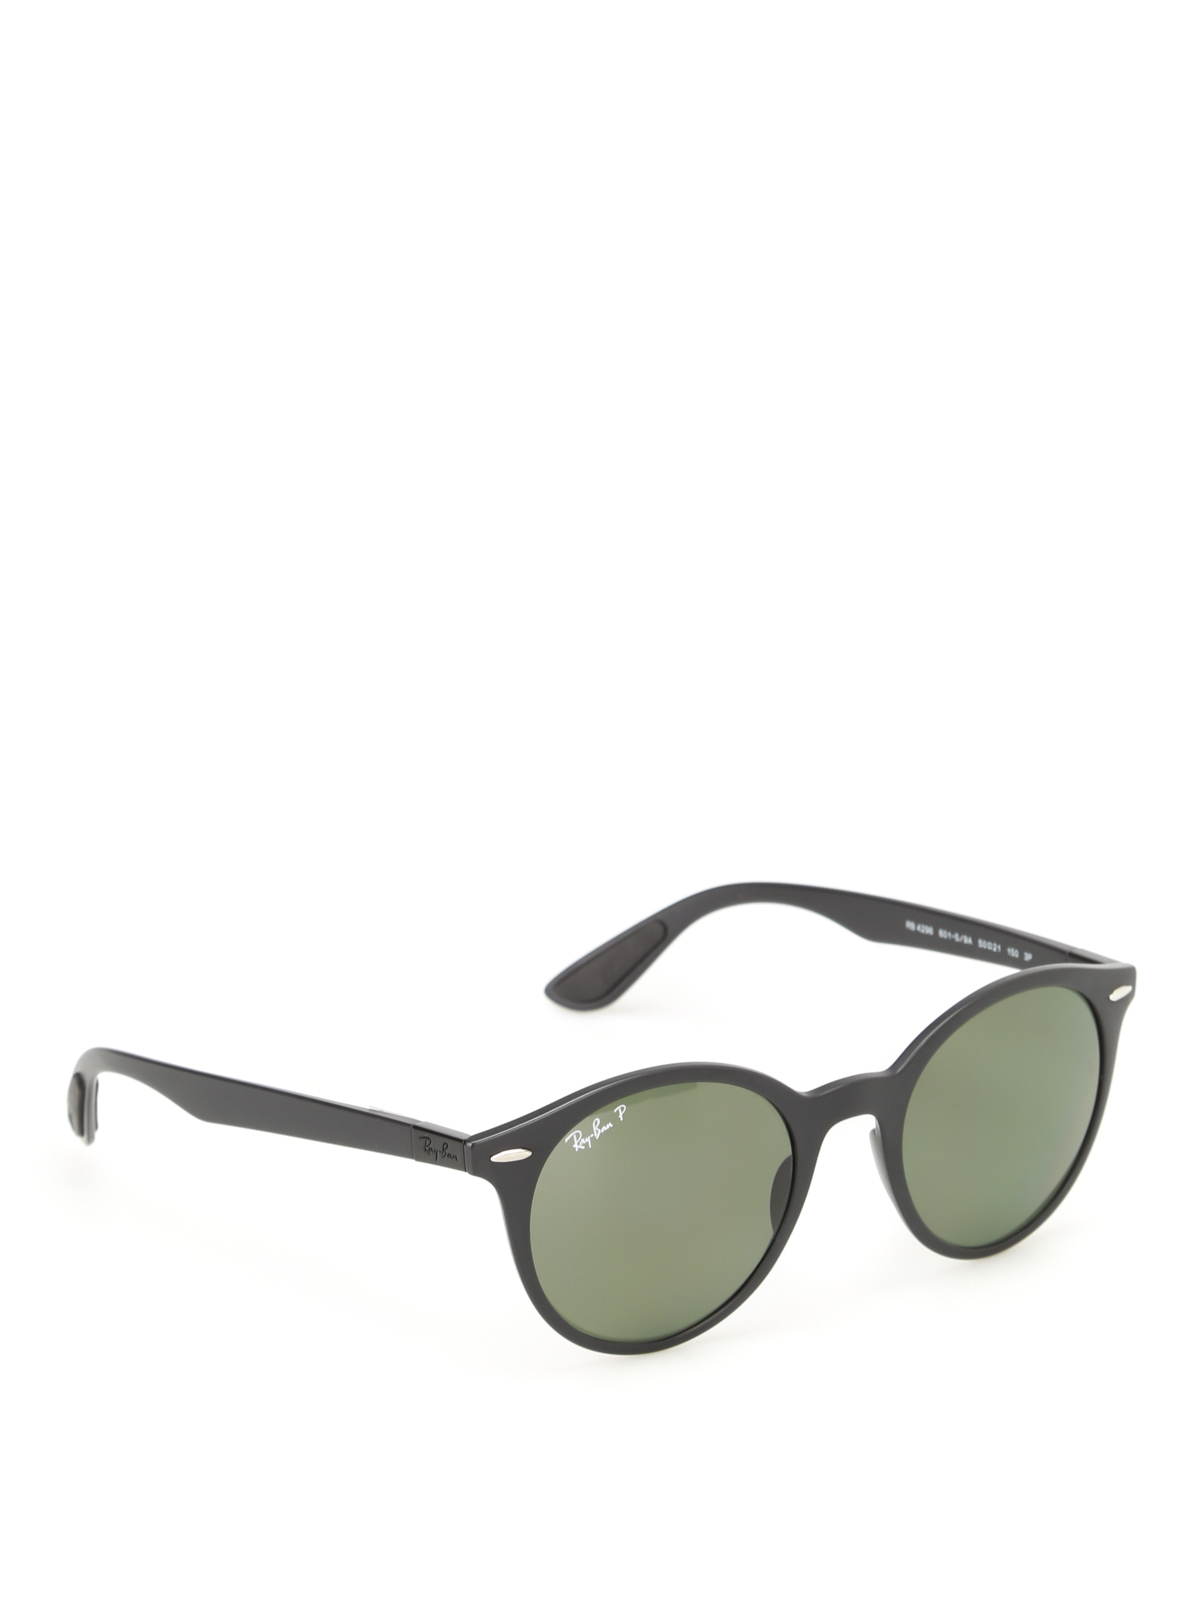 Sunglasses Ray Ban - LiteForce Polarized sunglasses - RB4296601S9A